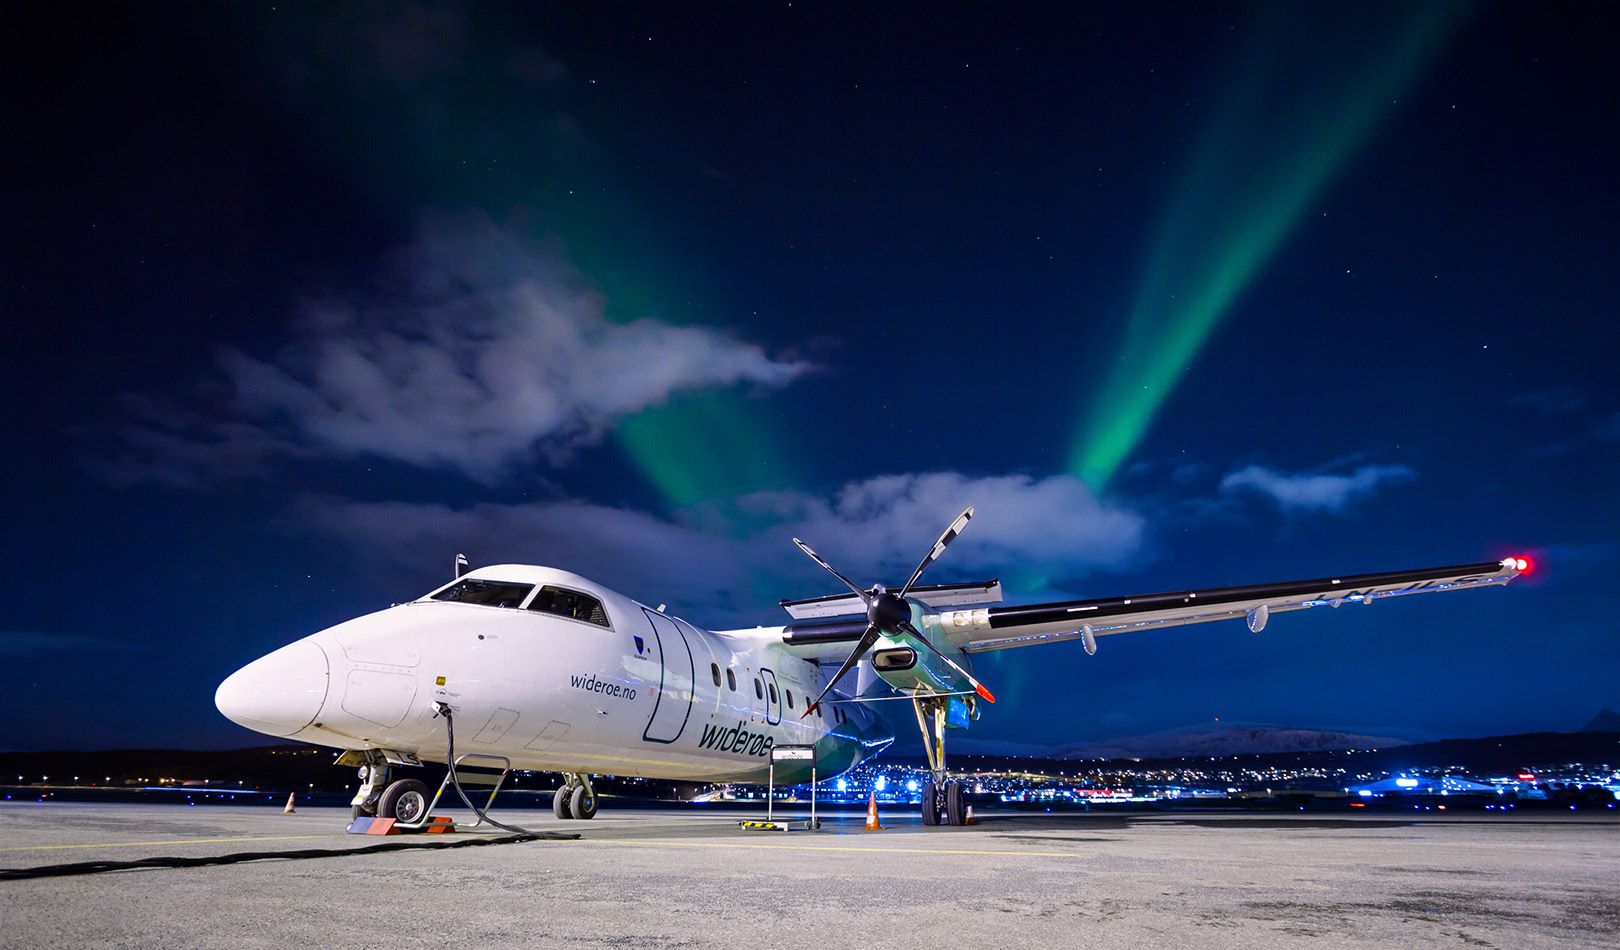 A Wideroe aircraft parked. It is night in the winter and a few northern lights can be seen in the back.